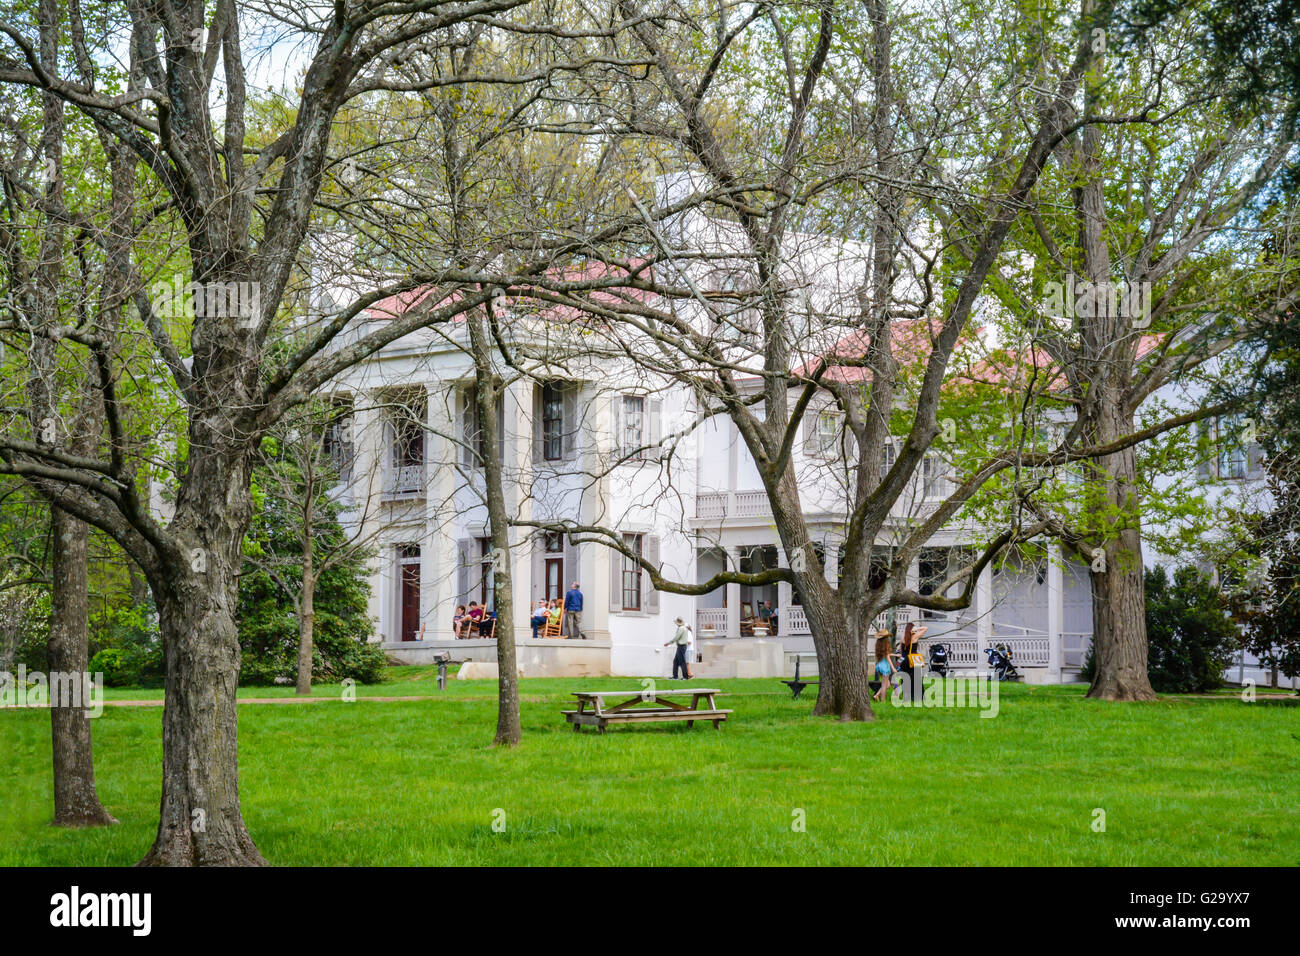 Visitors enjoy the veranda and tree covered grounds of The Belle Meade Plantation Mansion in Spring time near Nashville, TN Stock Photo